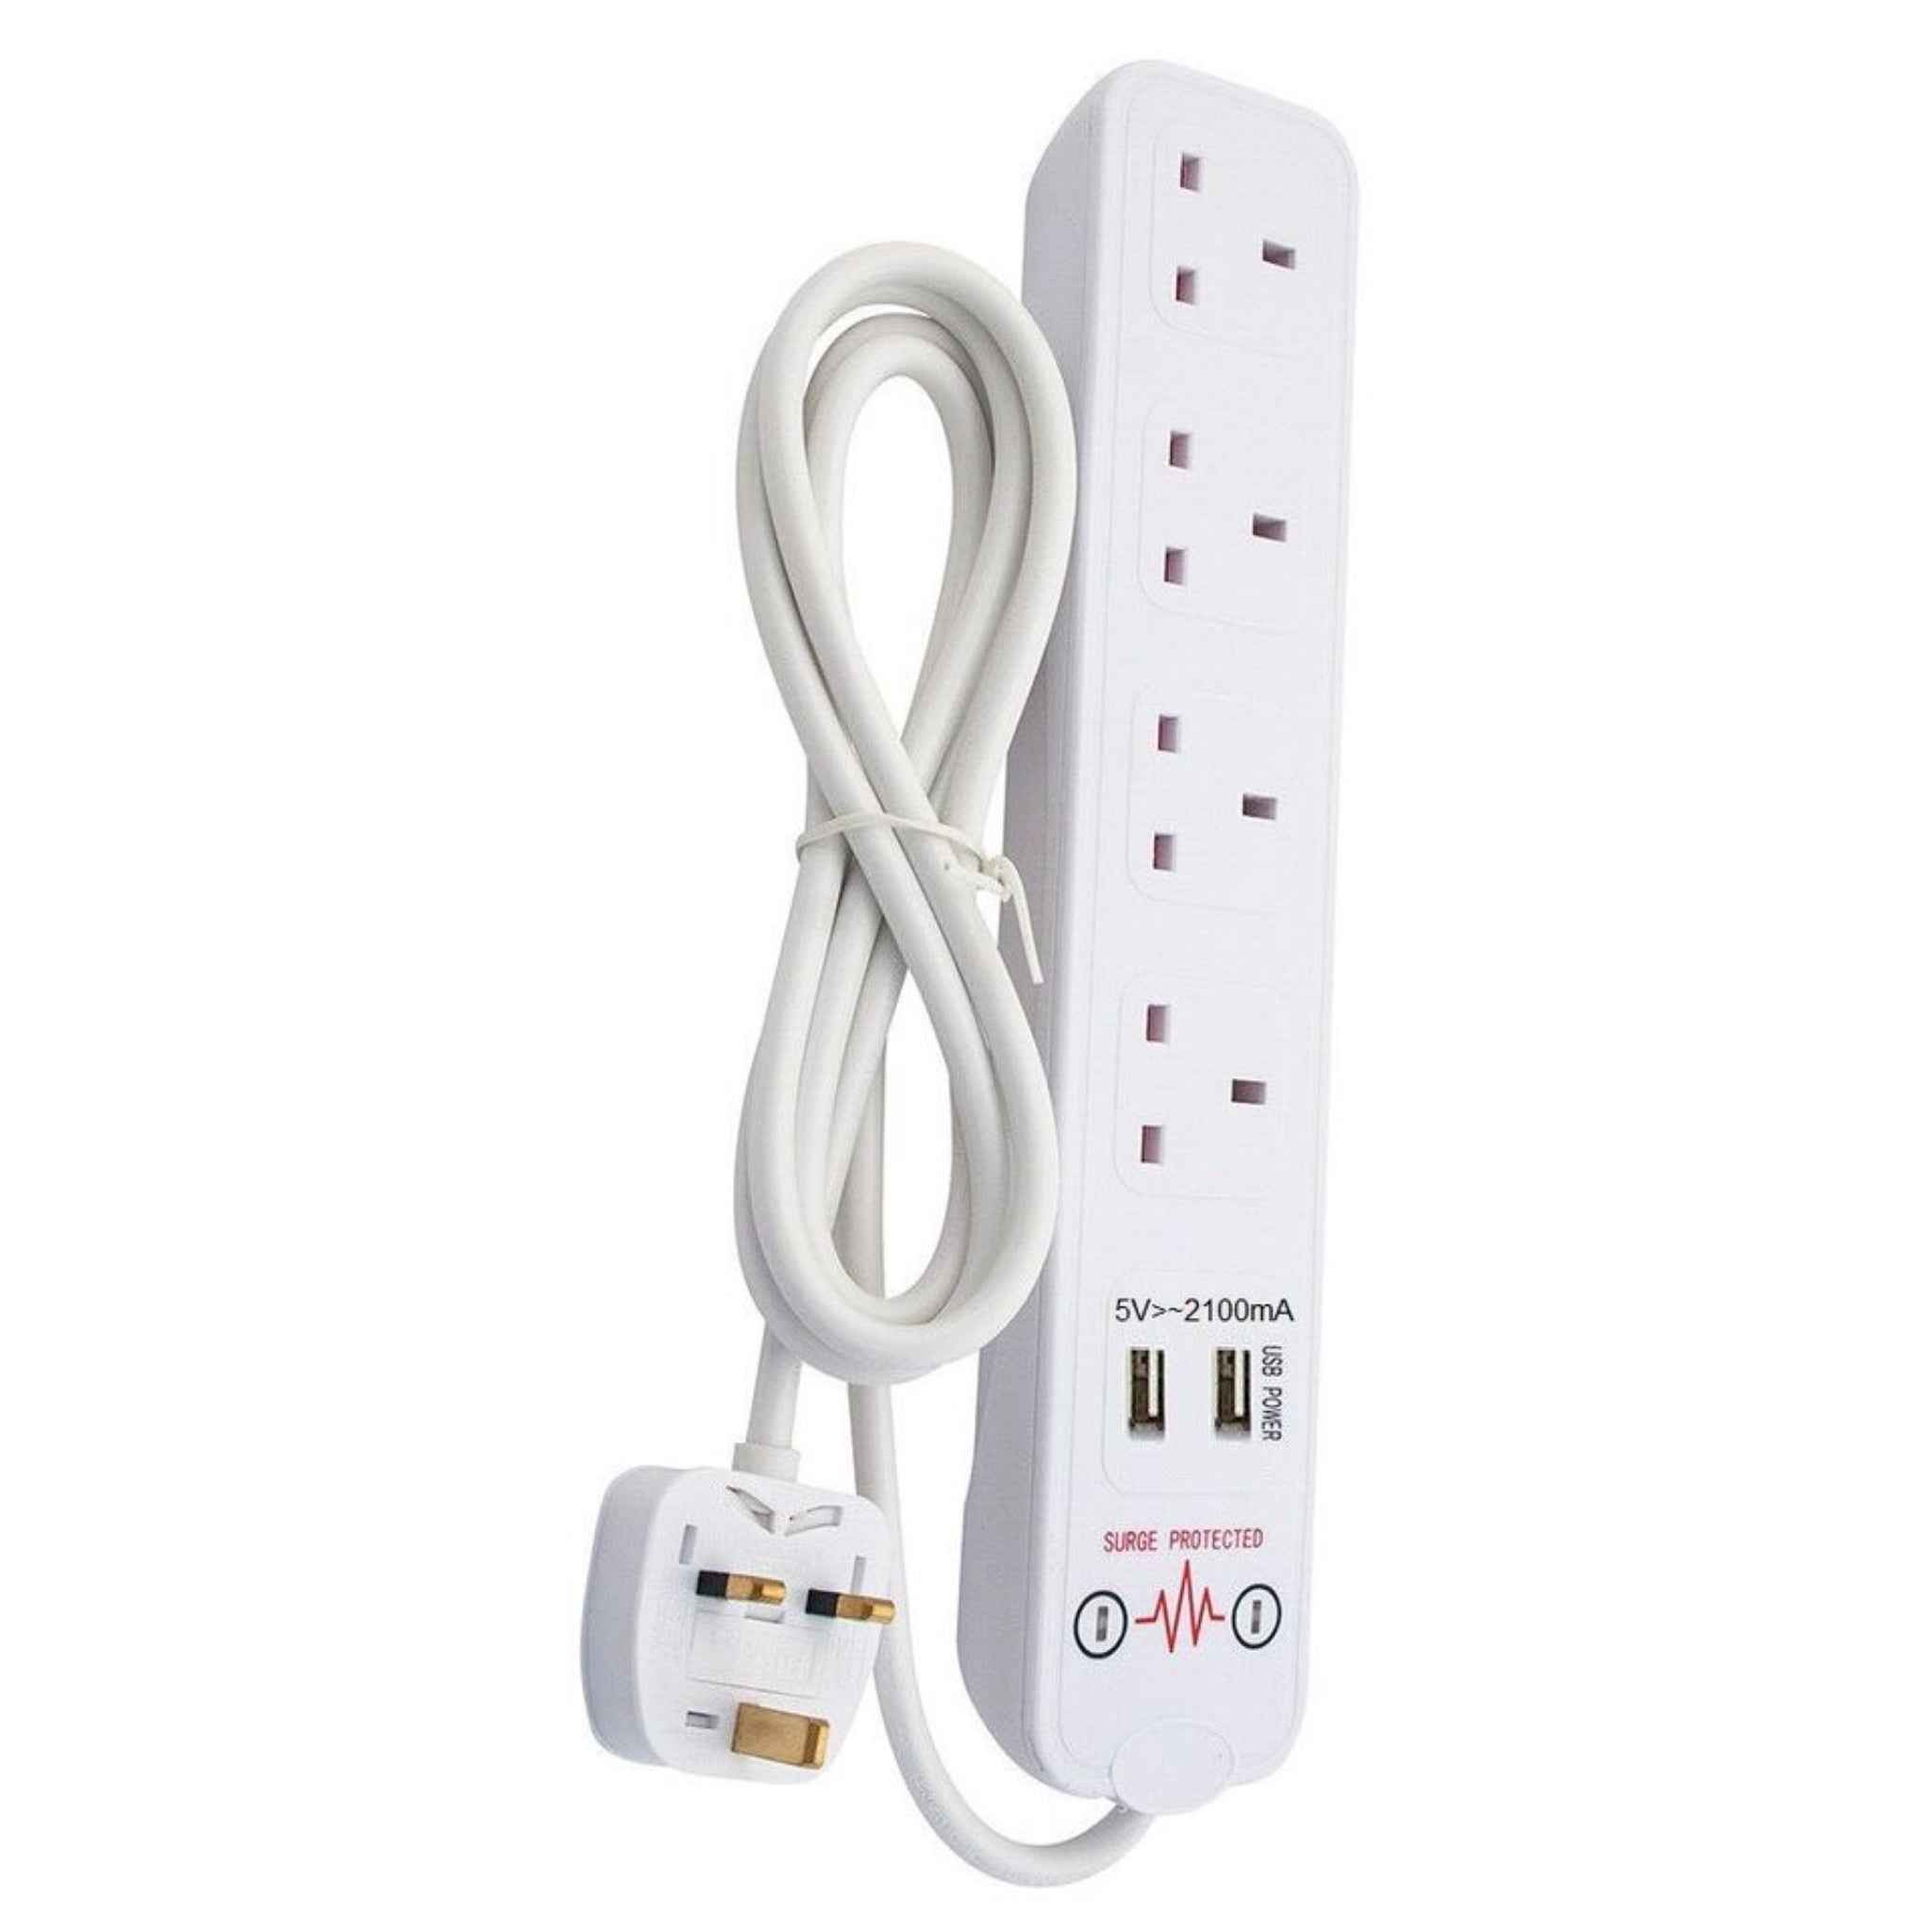 Beclen Harp Extension Lead with 2 USB Cable Electric Plug Socket UK Mains Power 4 Gang Way